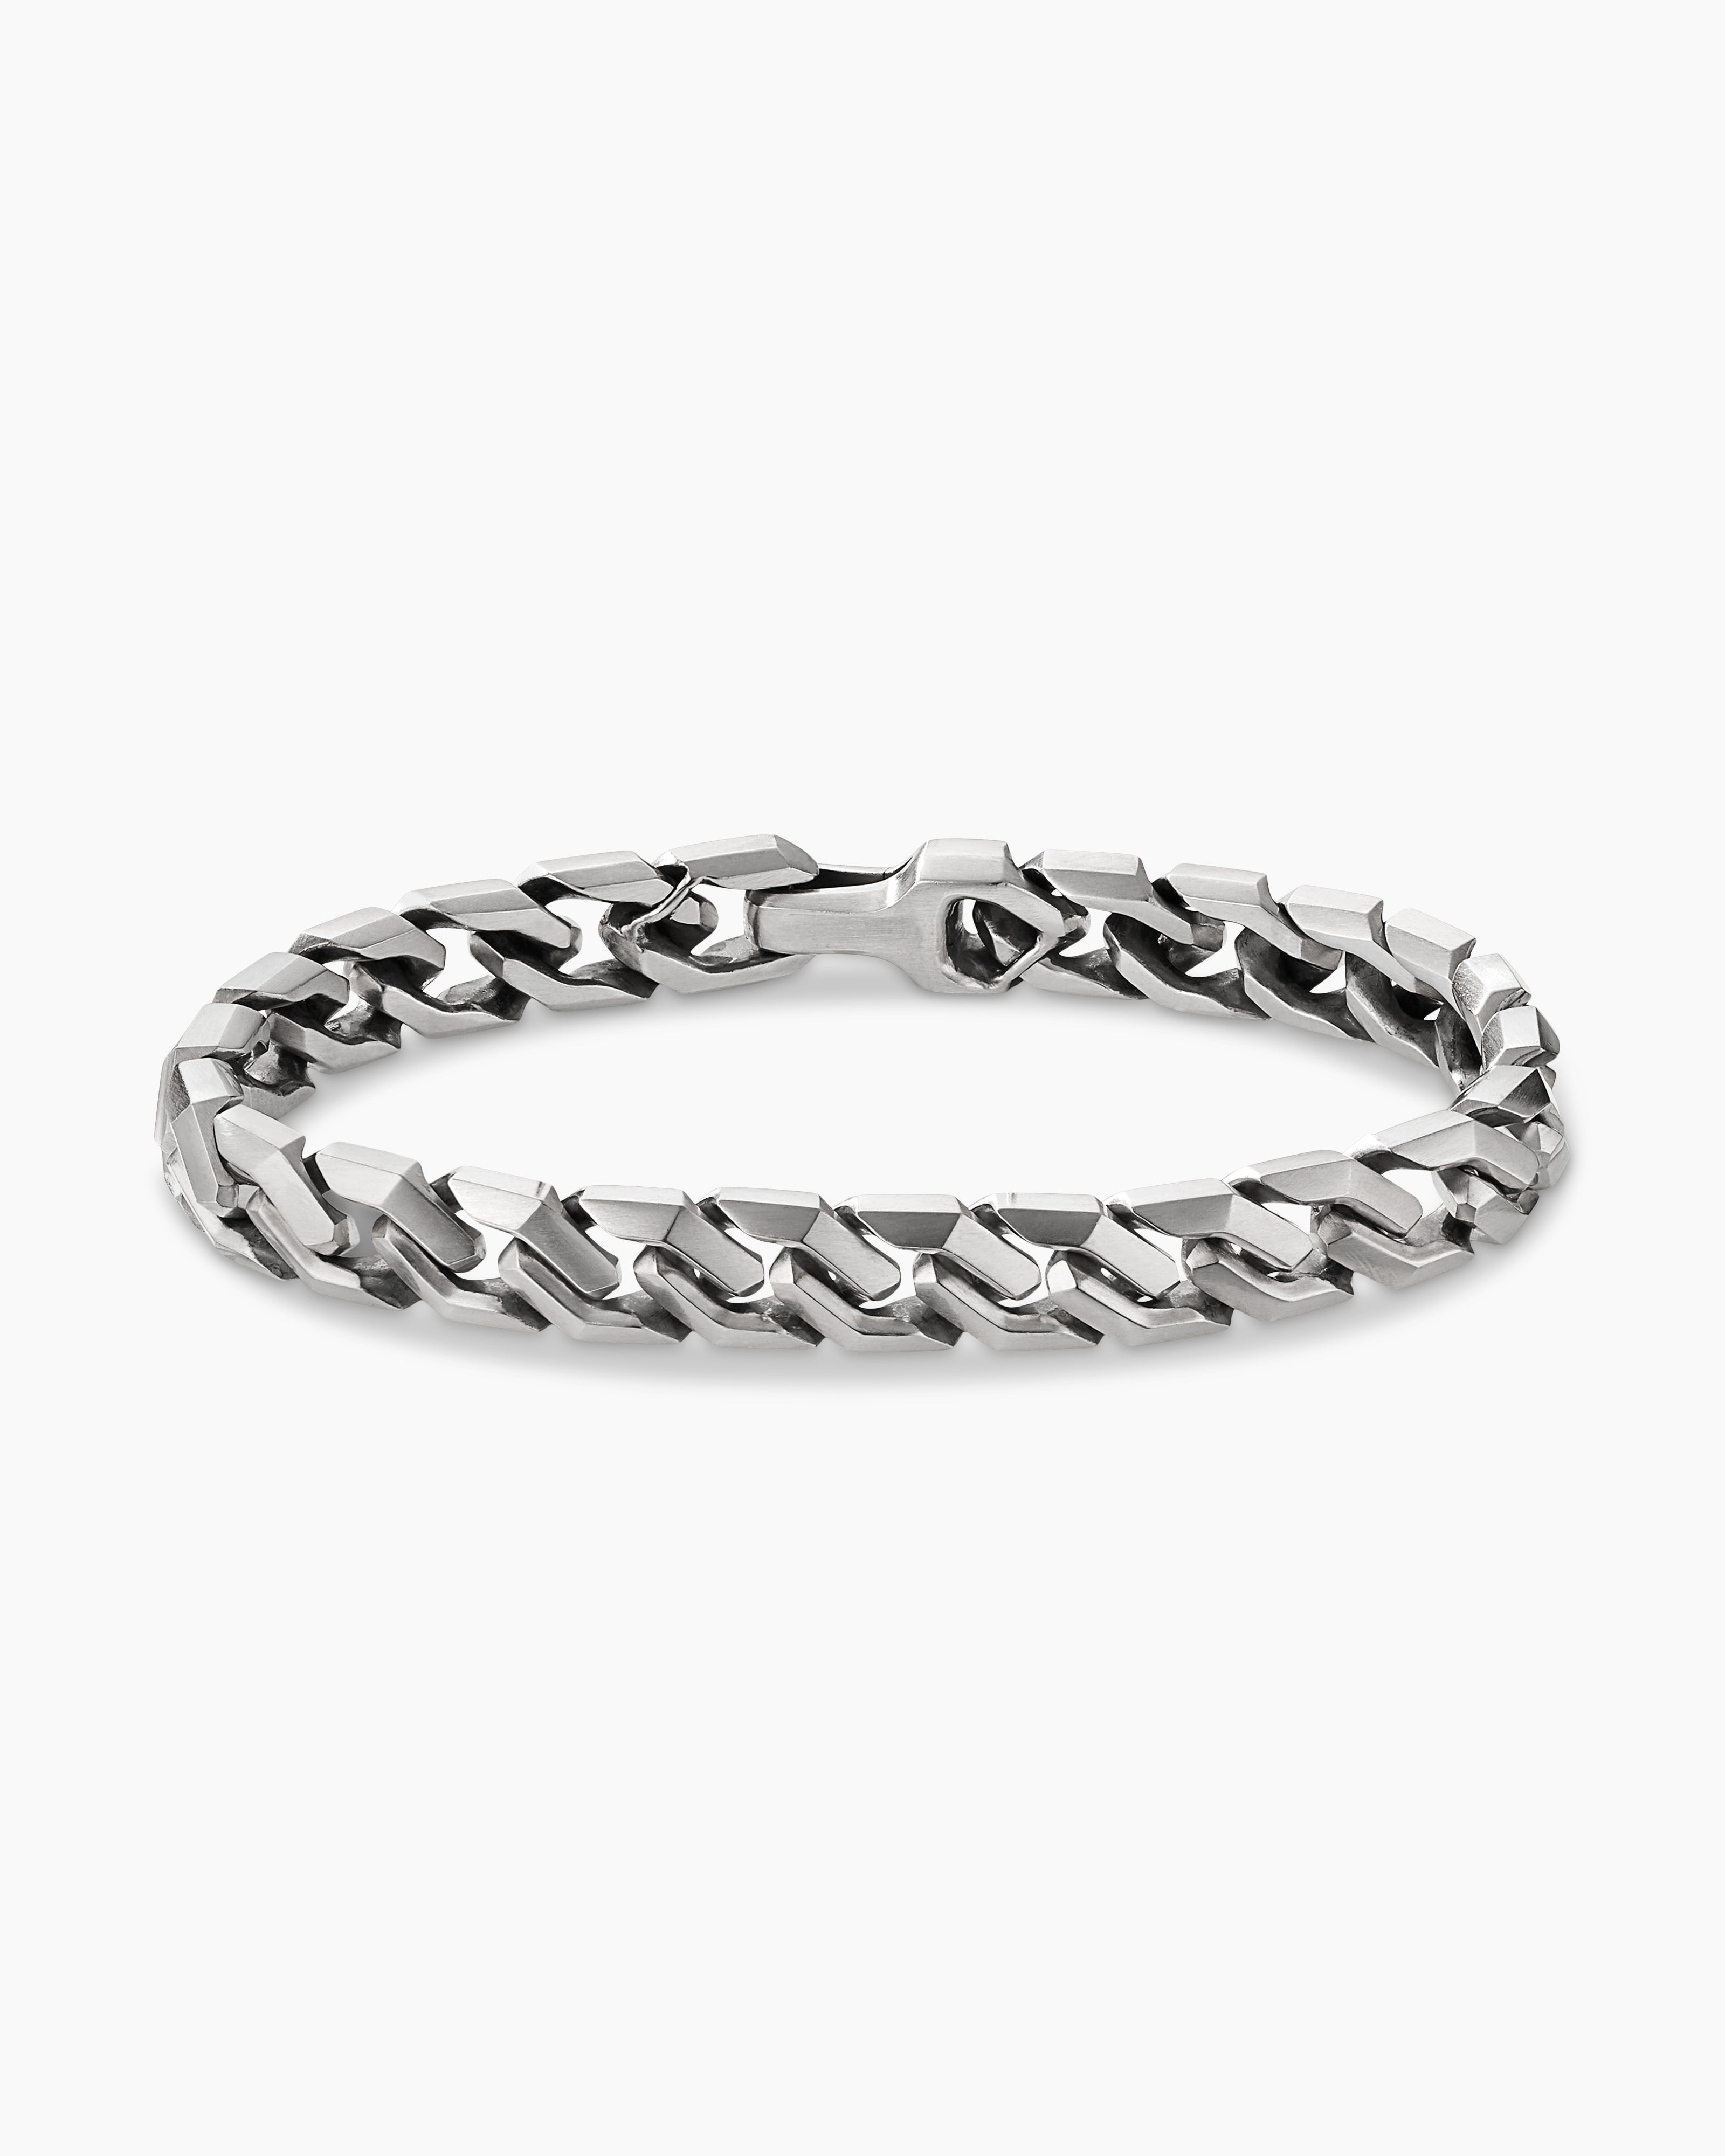 Mens Curb Chain Angular Link Bracelet in Sterling Silver, 8.7mm